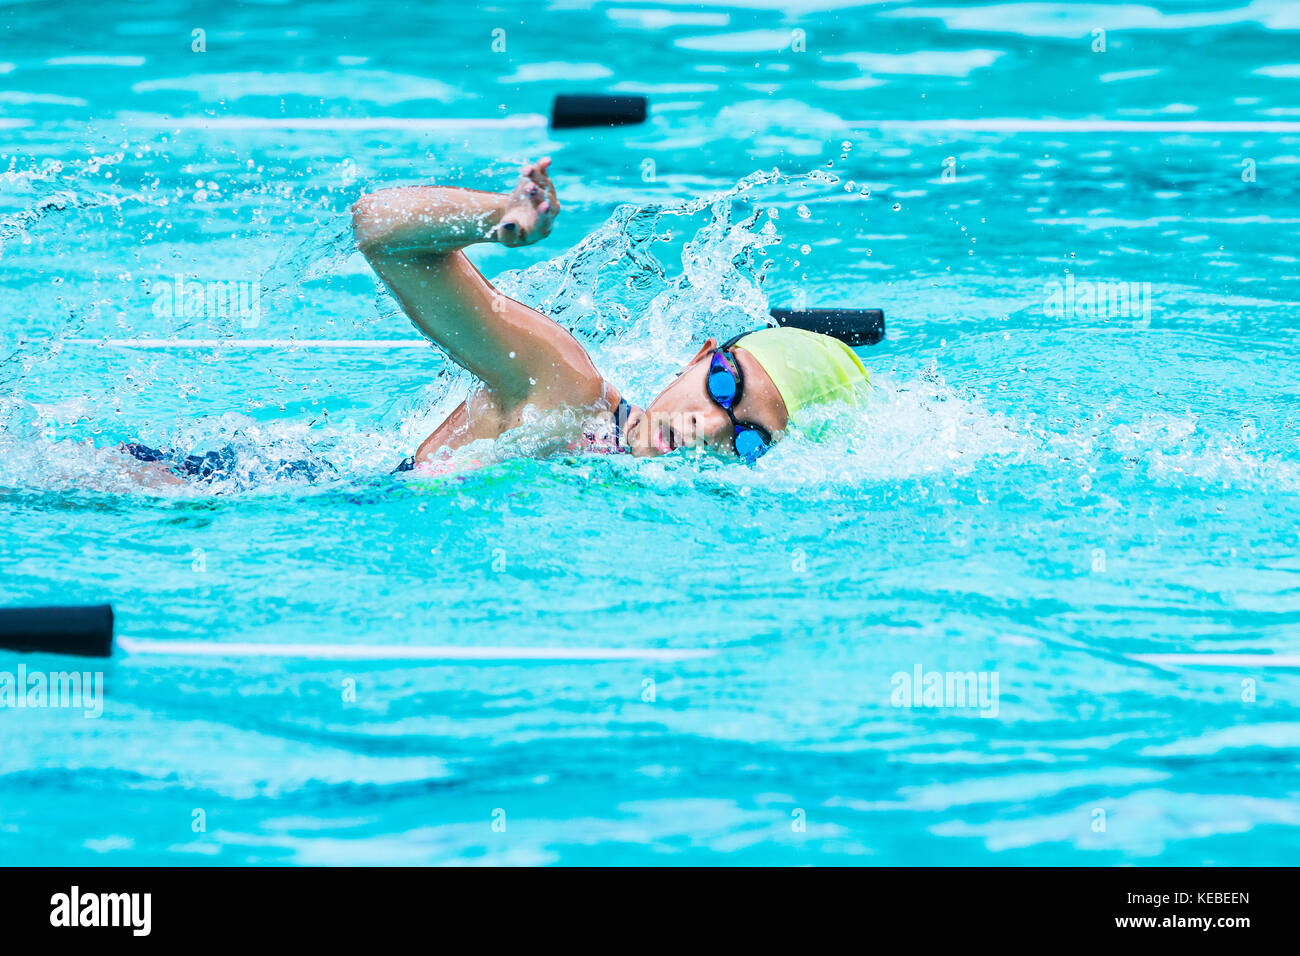 Chiang Mai, Thailand - 11 October 2017 - young female swimmer races in freestyle stroke and turns to catch her breath at a school swimming pool in Chi Stock Photo